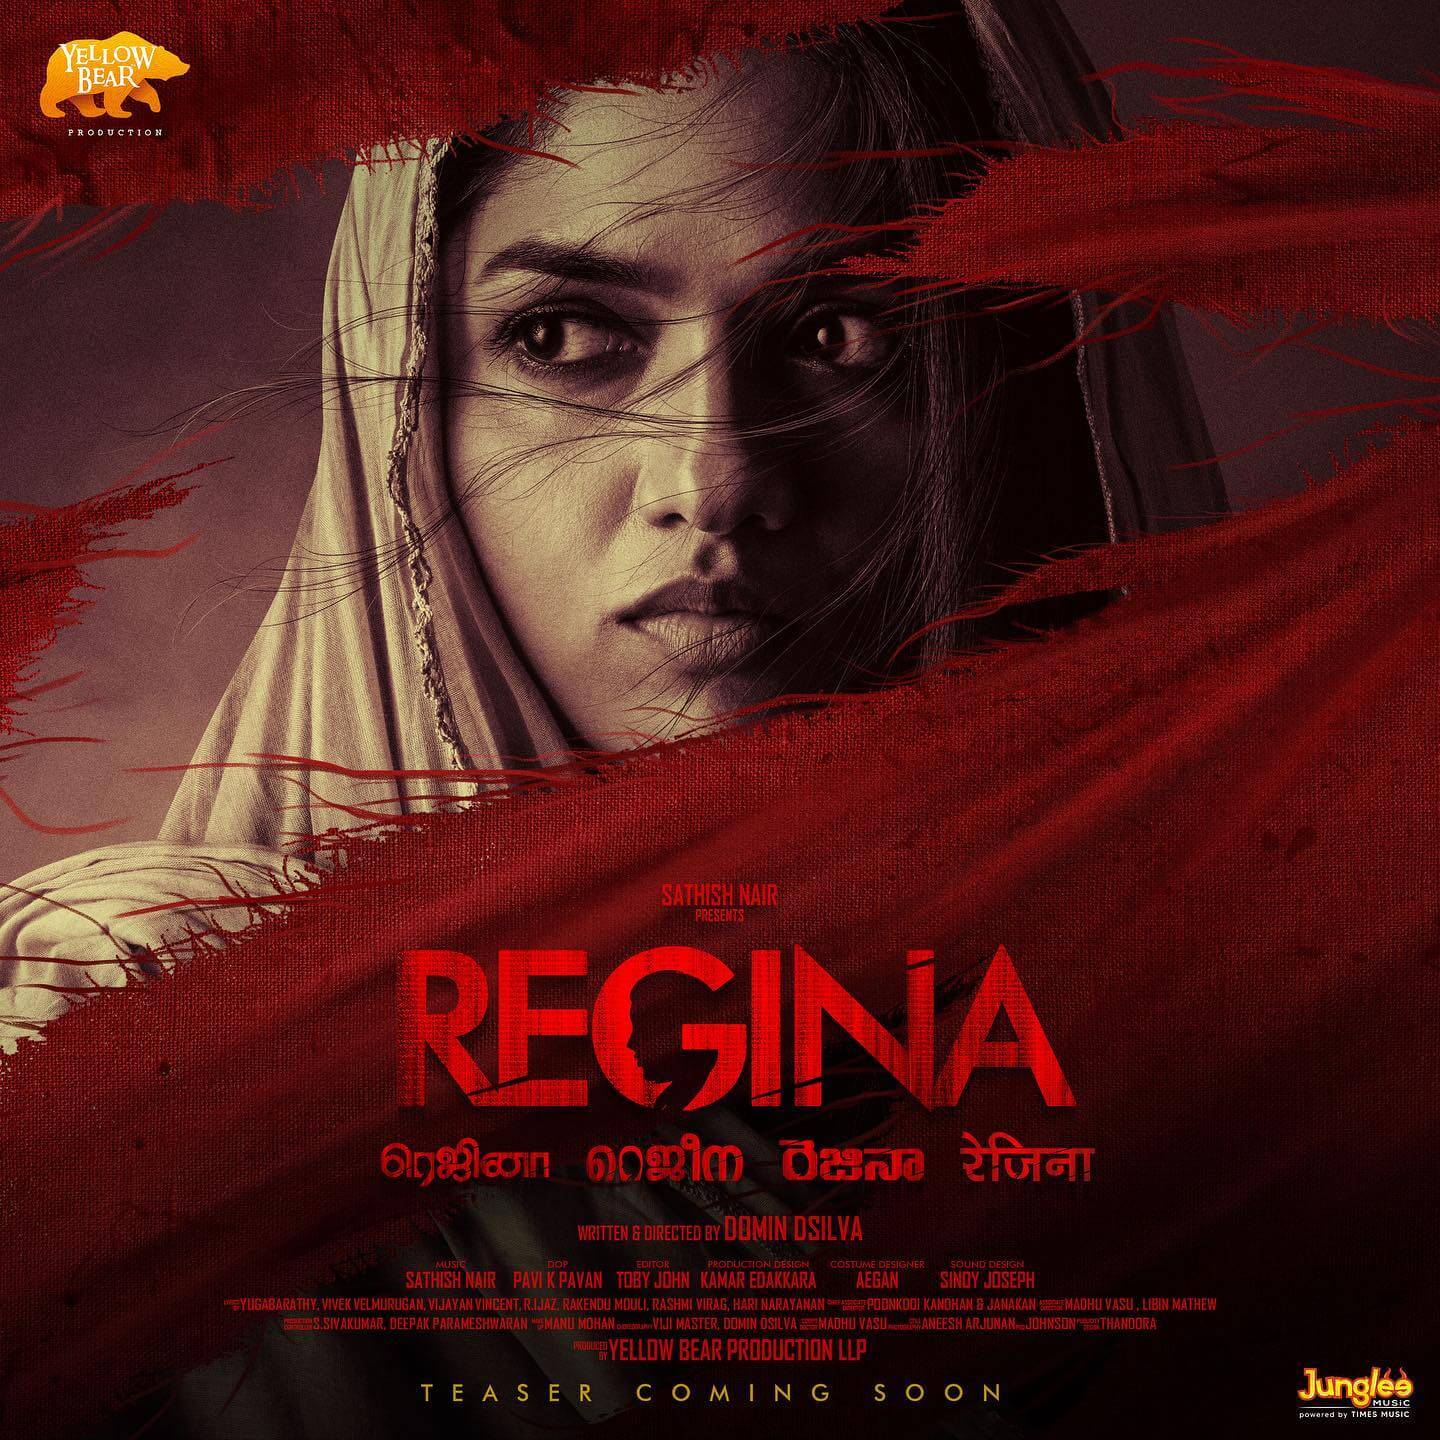 The First Poster of the movie Regina Released